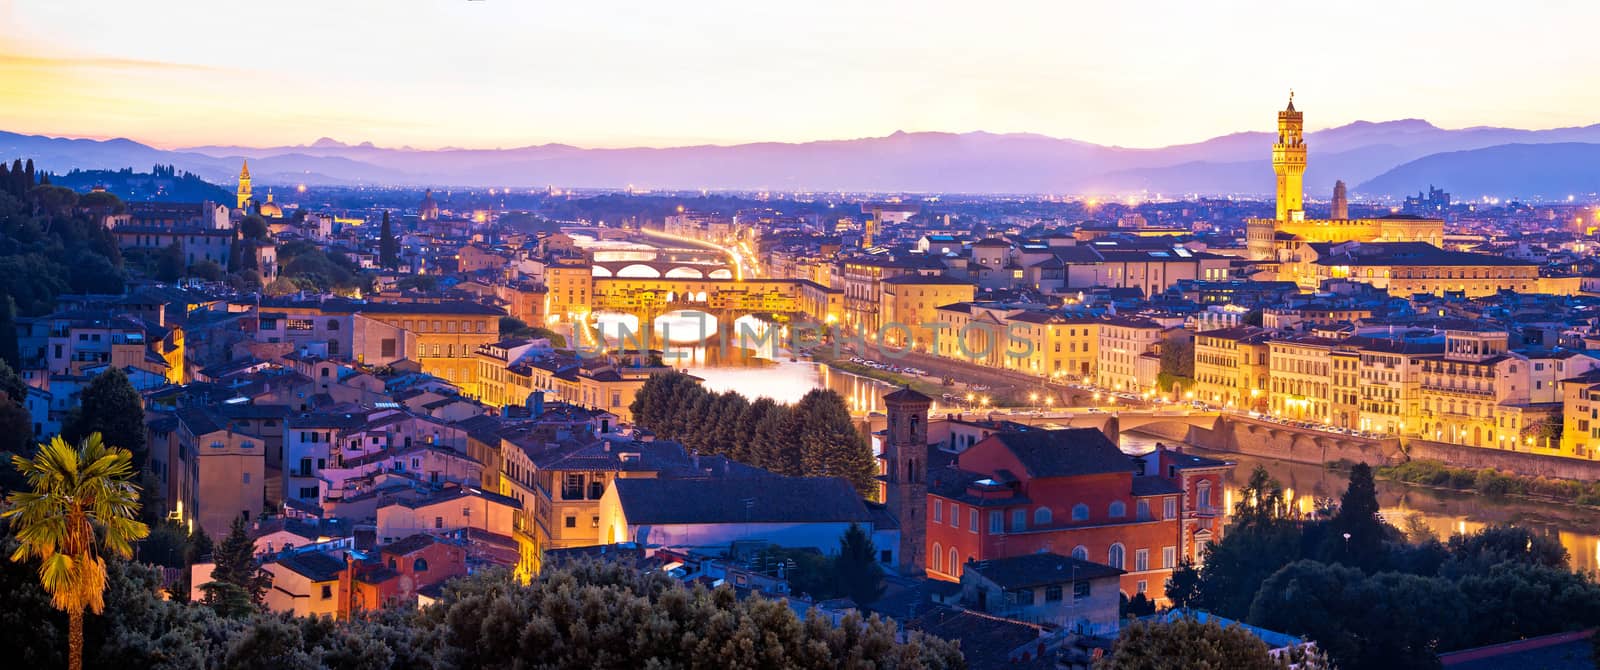 Florence cityscape panoramic evening view by xbrchx